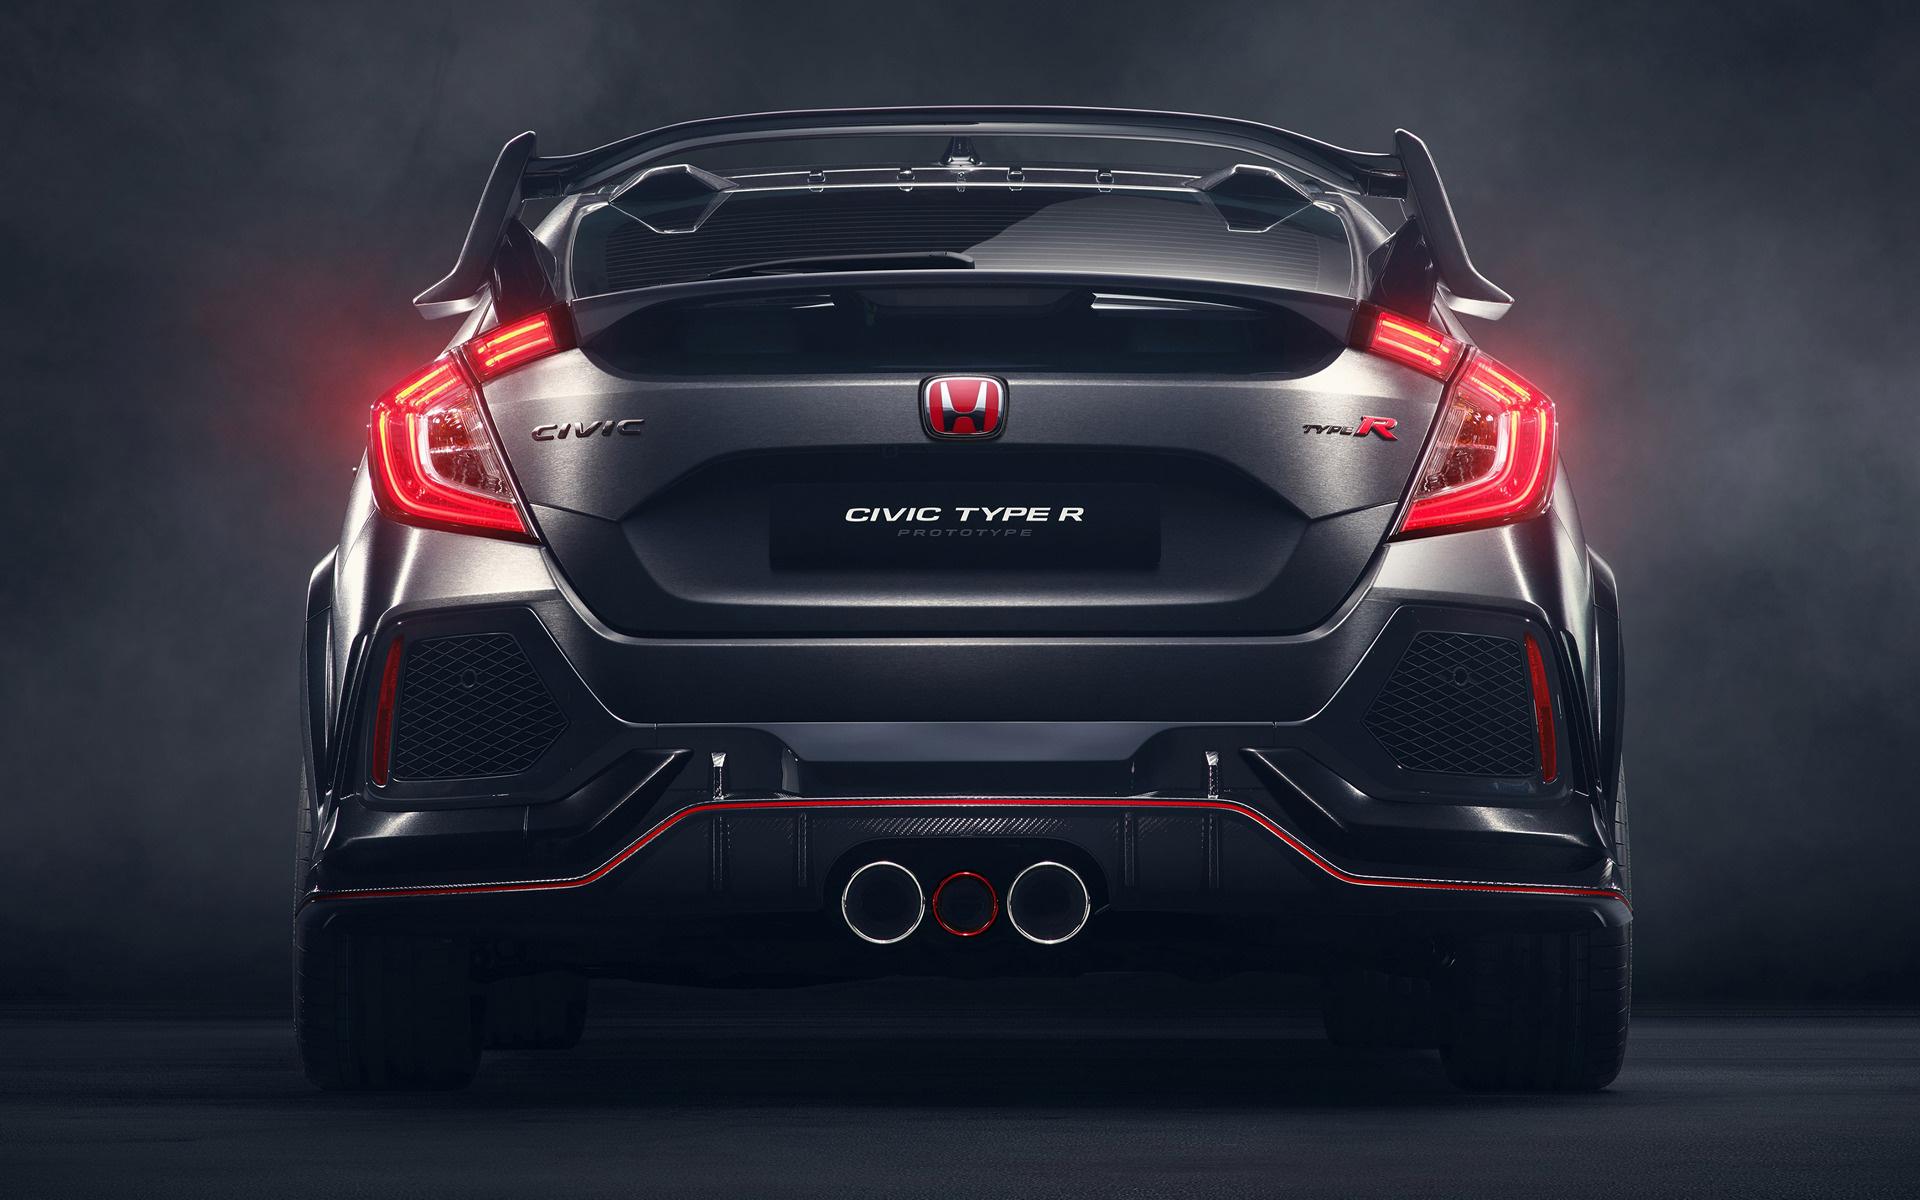 Civic Type R Wallpaper , Find HD Wallpaper For Free